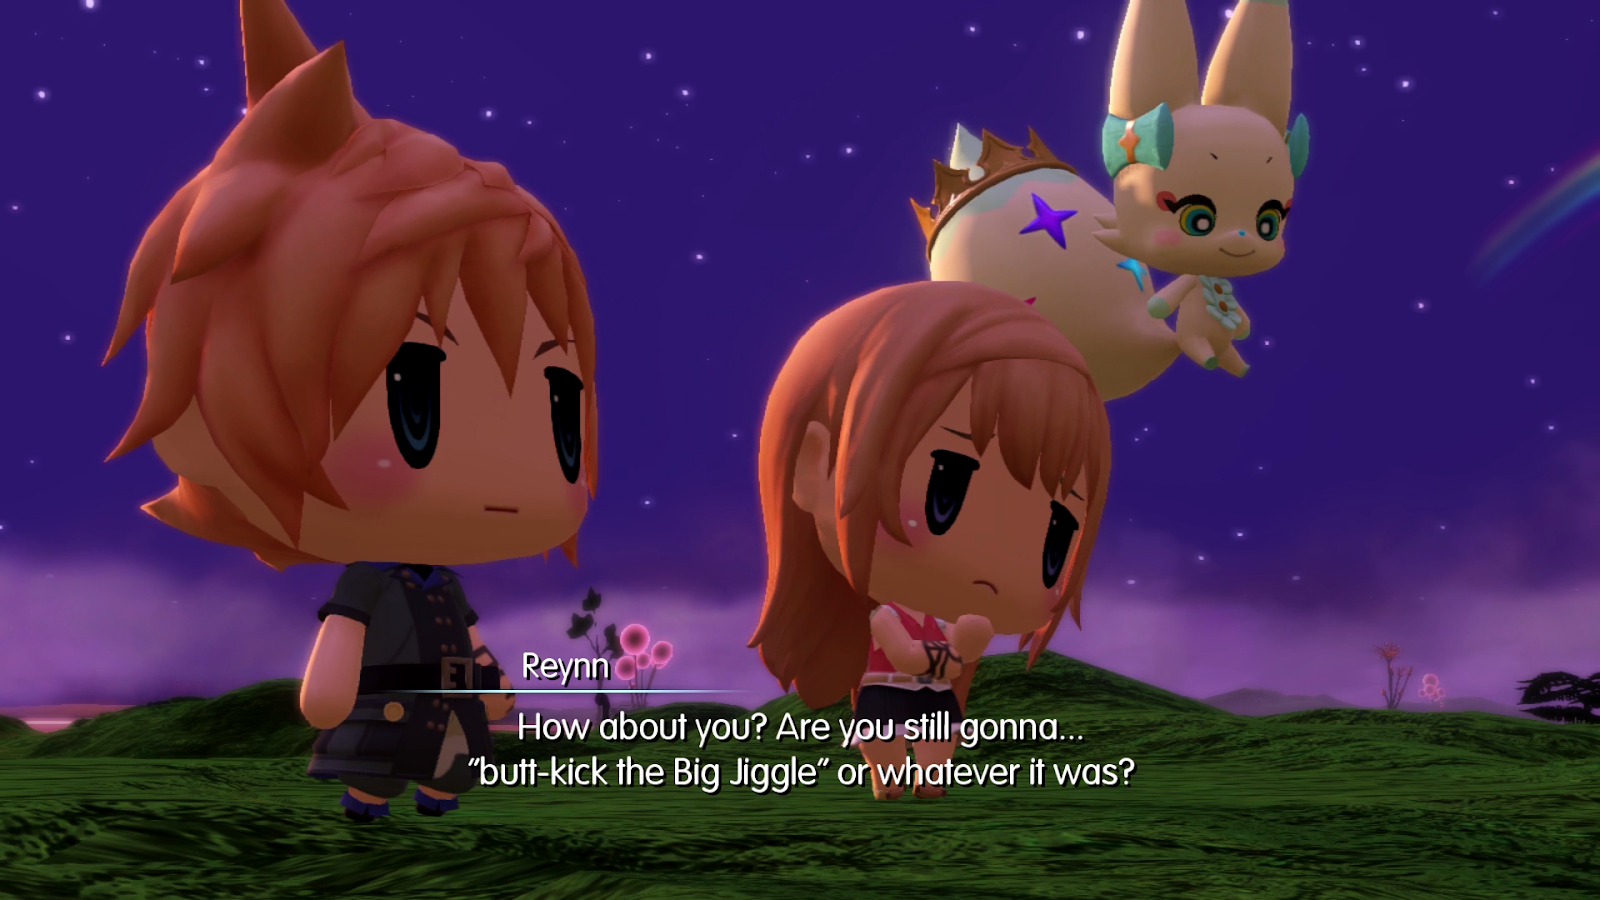 Jrpg Jungle Review World Of Final Fantasy Maxima Played On Switch Also On Xbox One And Ps4 And Pc As Dlc